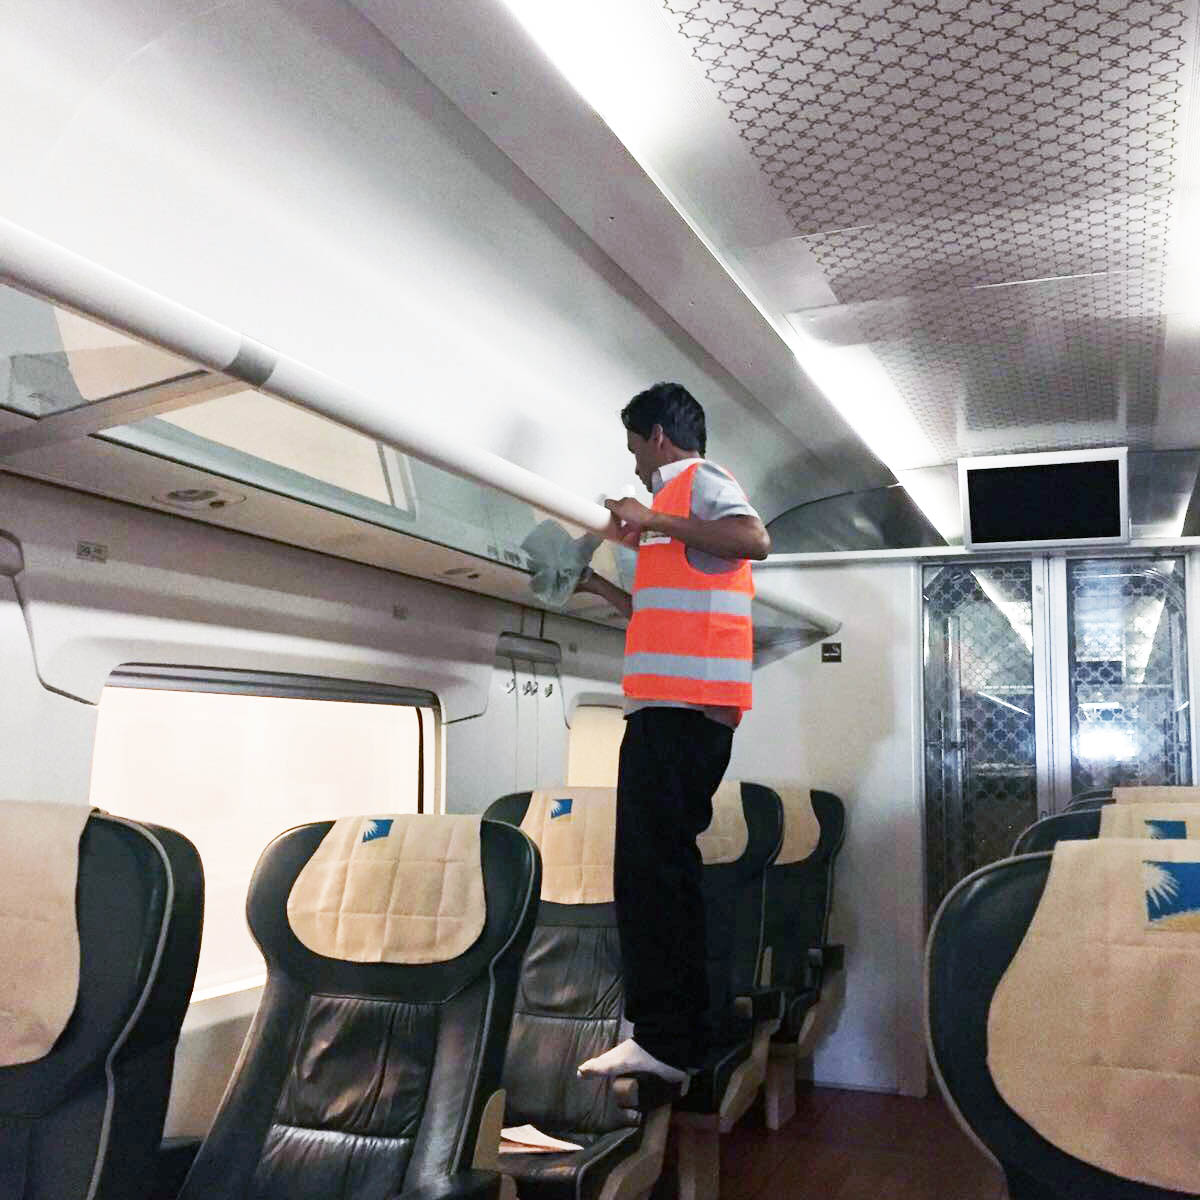 CAF Arabia Case Study, worker cleaning trains using facility management standards